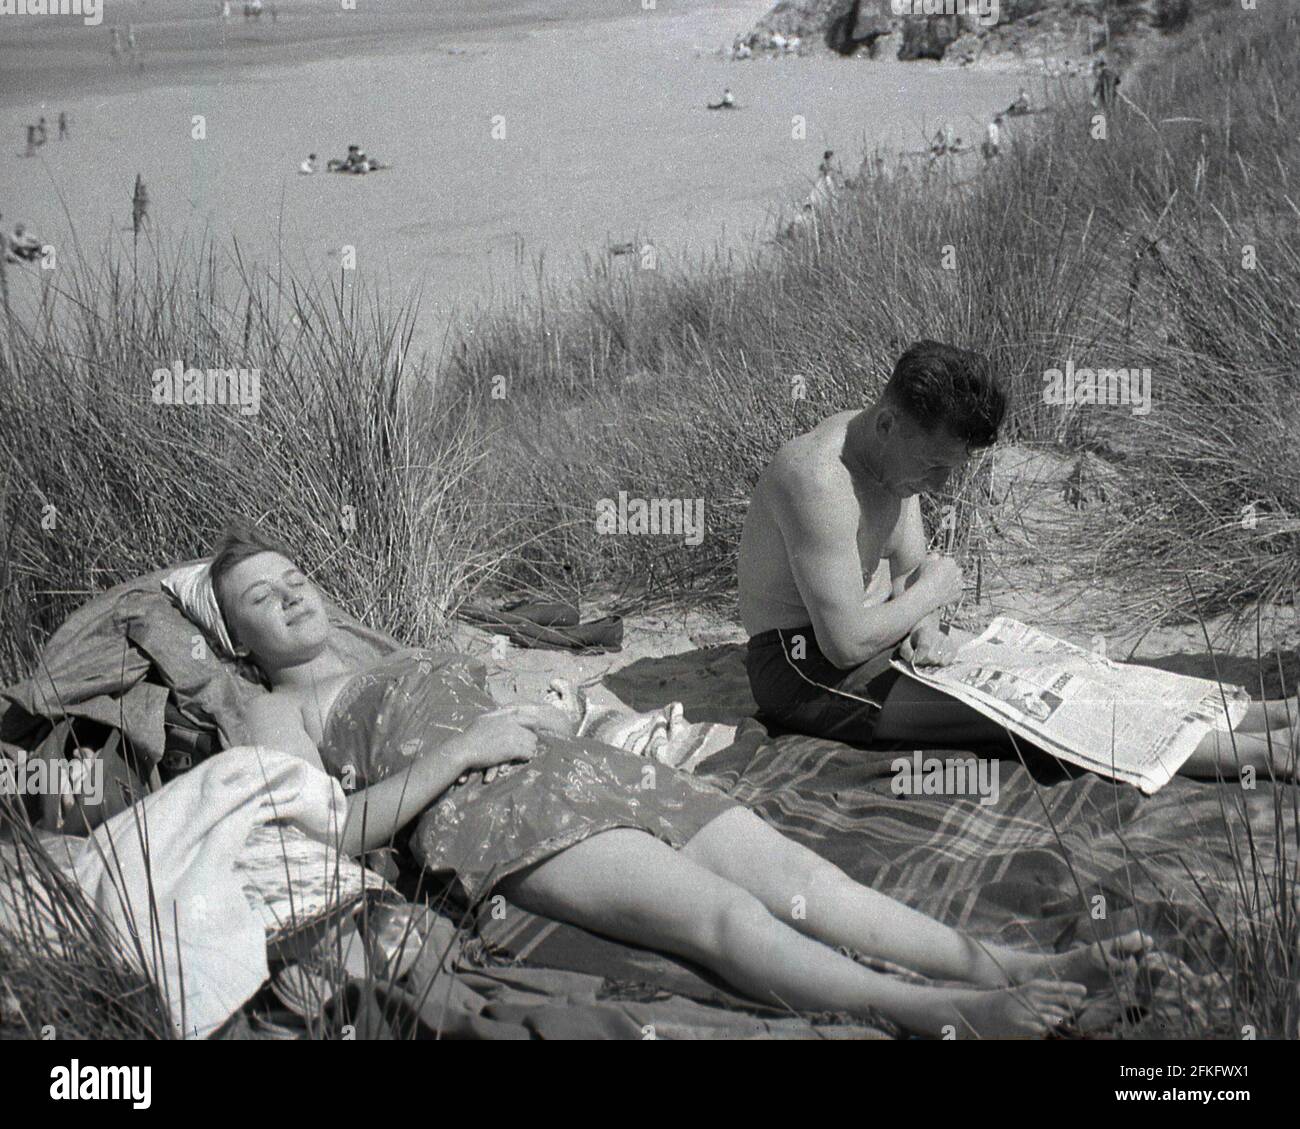 1960s, historical, a couple relaxing on a rug on some sand dunes by a sandy beach, the lady sunbathing, the man sitting reading a broadsheet newspaper, England, UK. Stock Photo